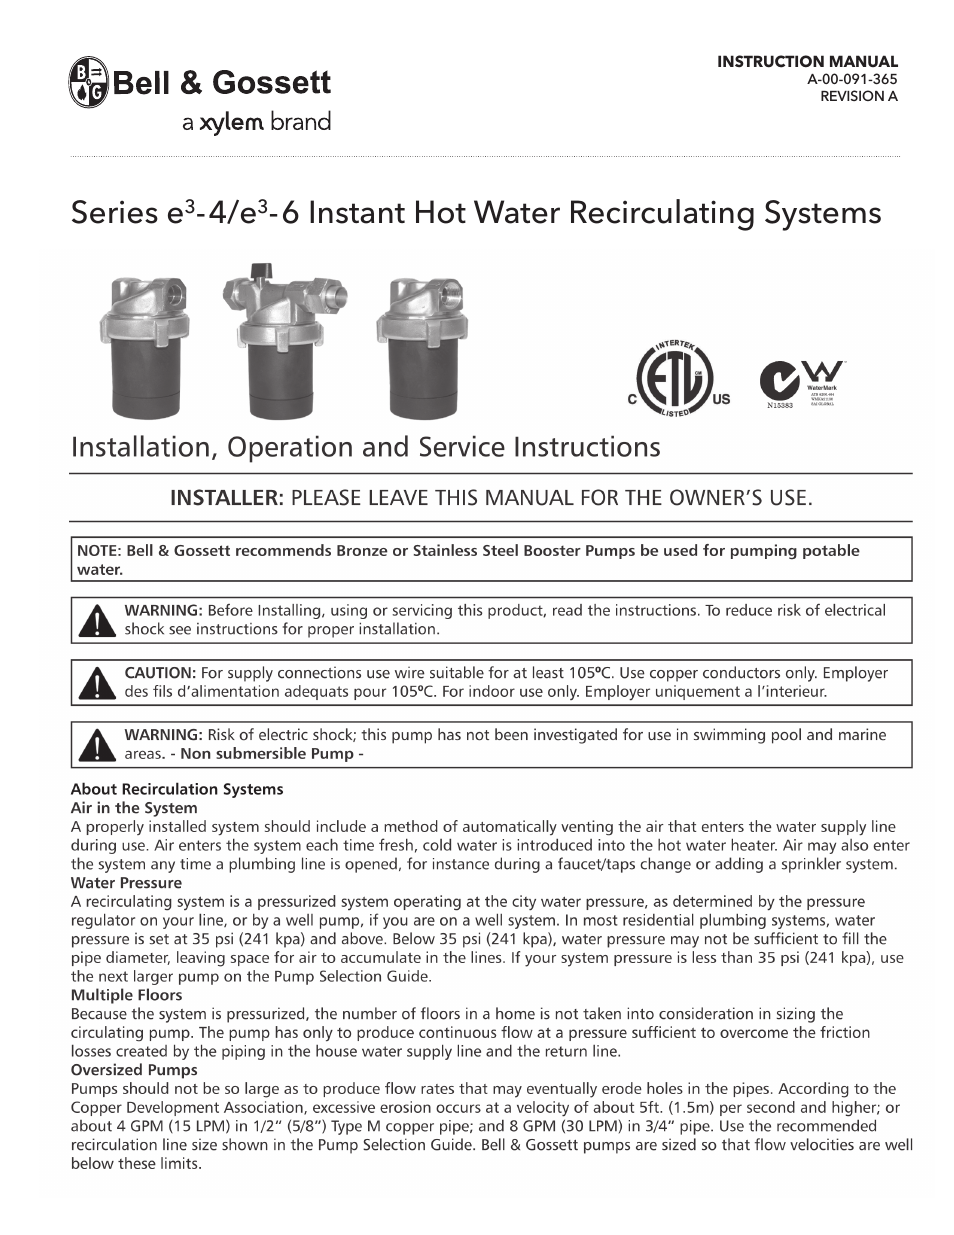 A 00 091 365A Series e3 4/e3 6 Instant Hot Water Recirculating Systems